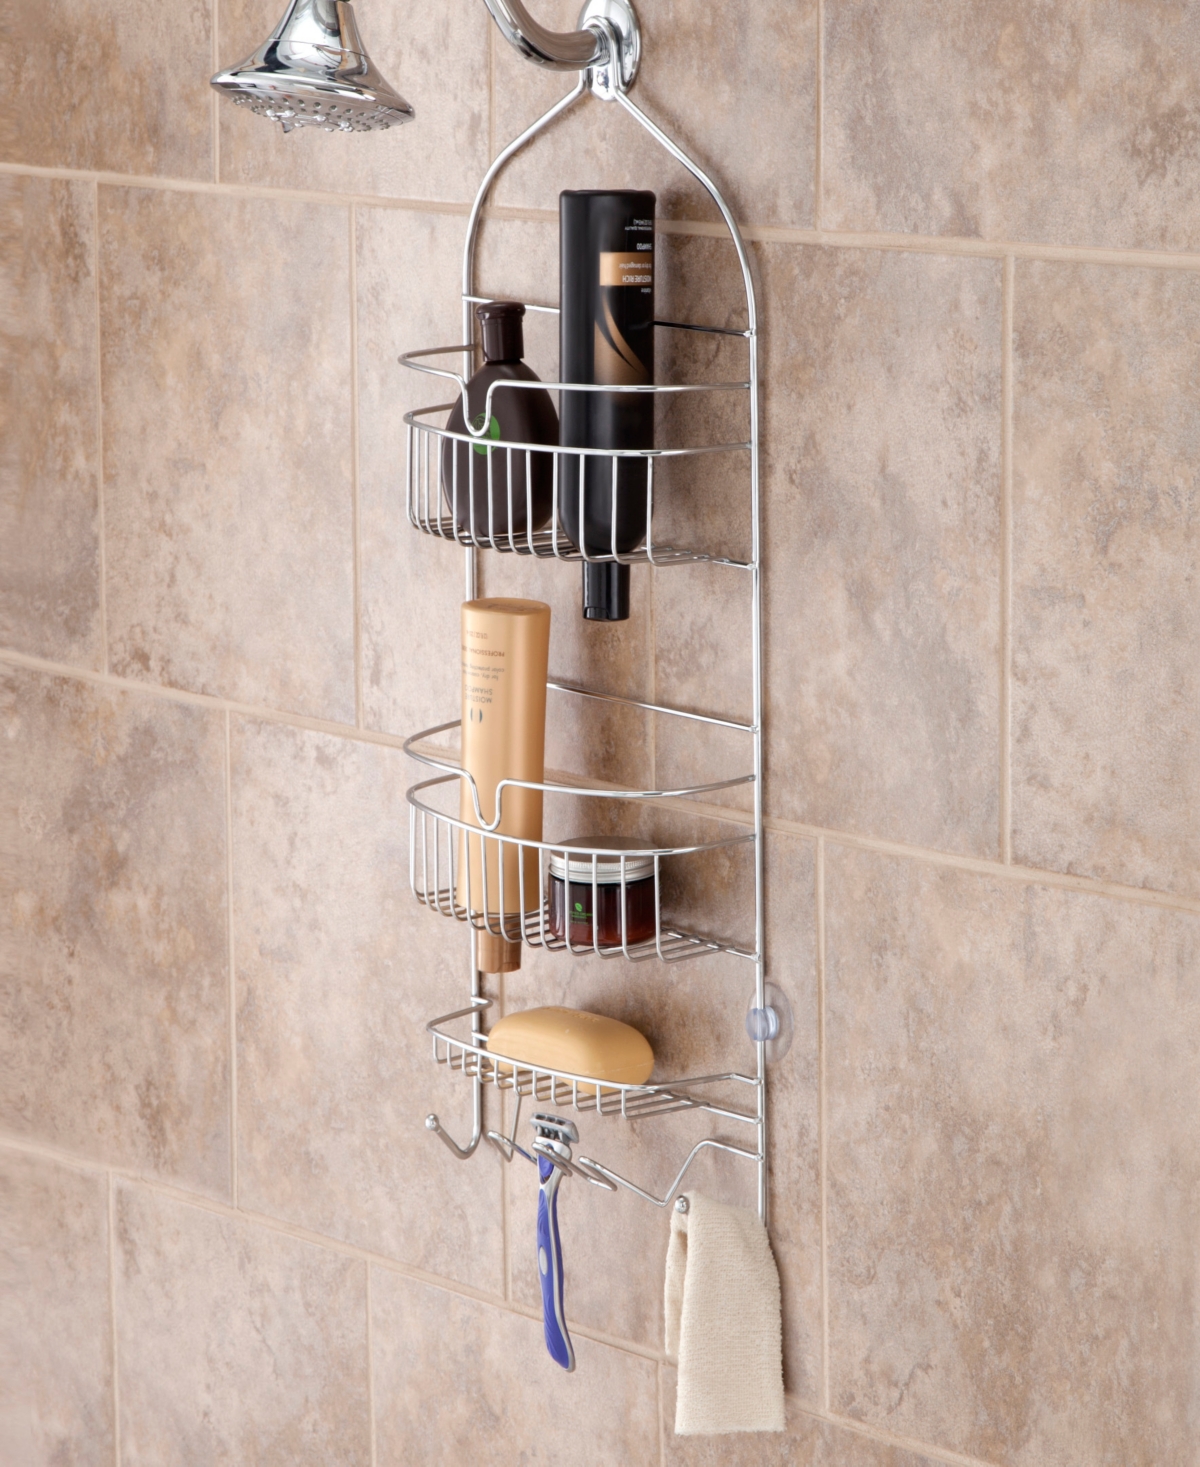 Kenney Rust-Resistant Heavy Duty 3-Tier Large Hanging Shower Caddy Bedding